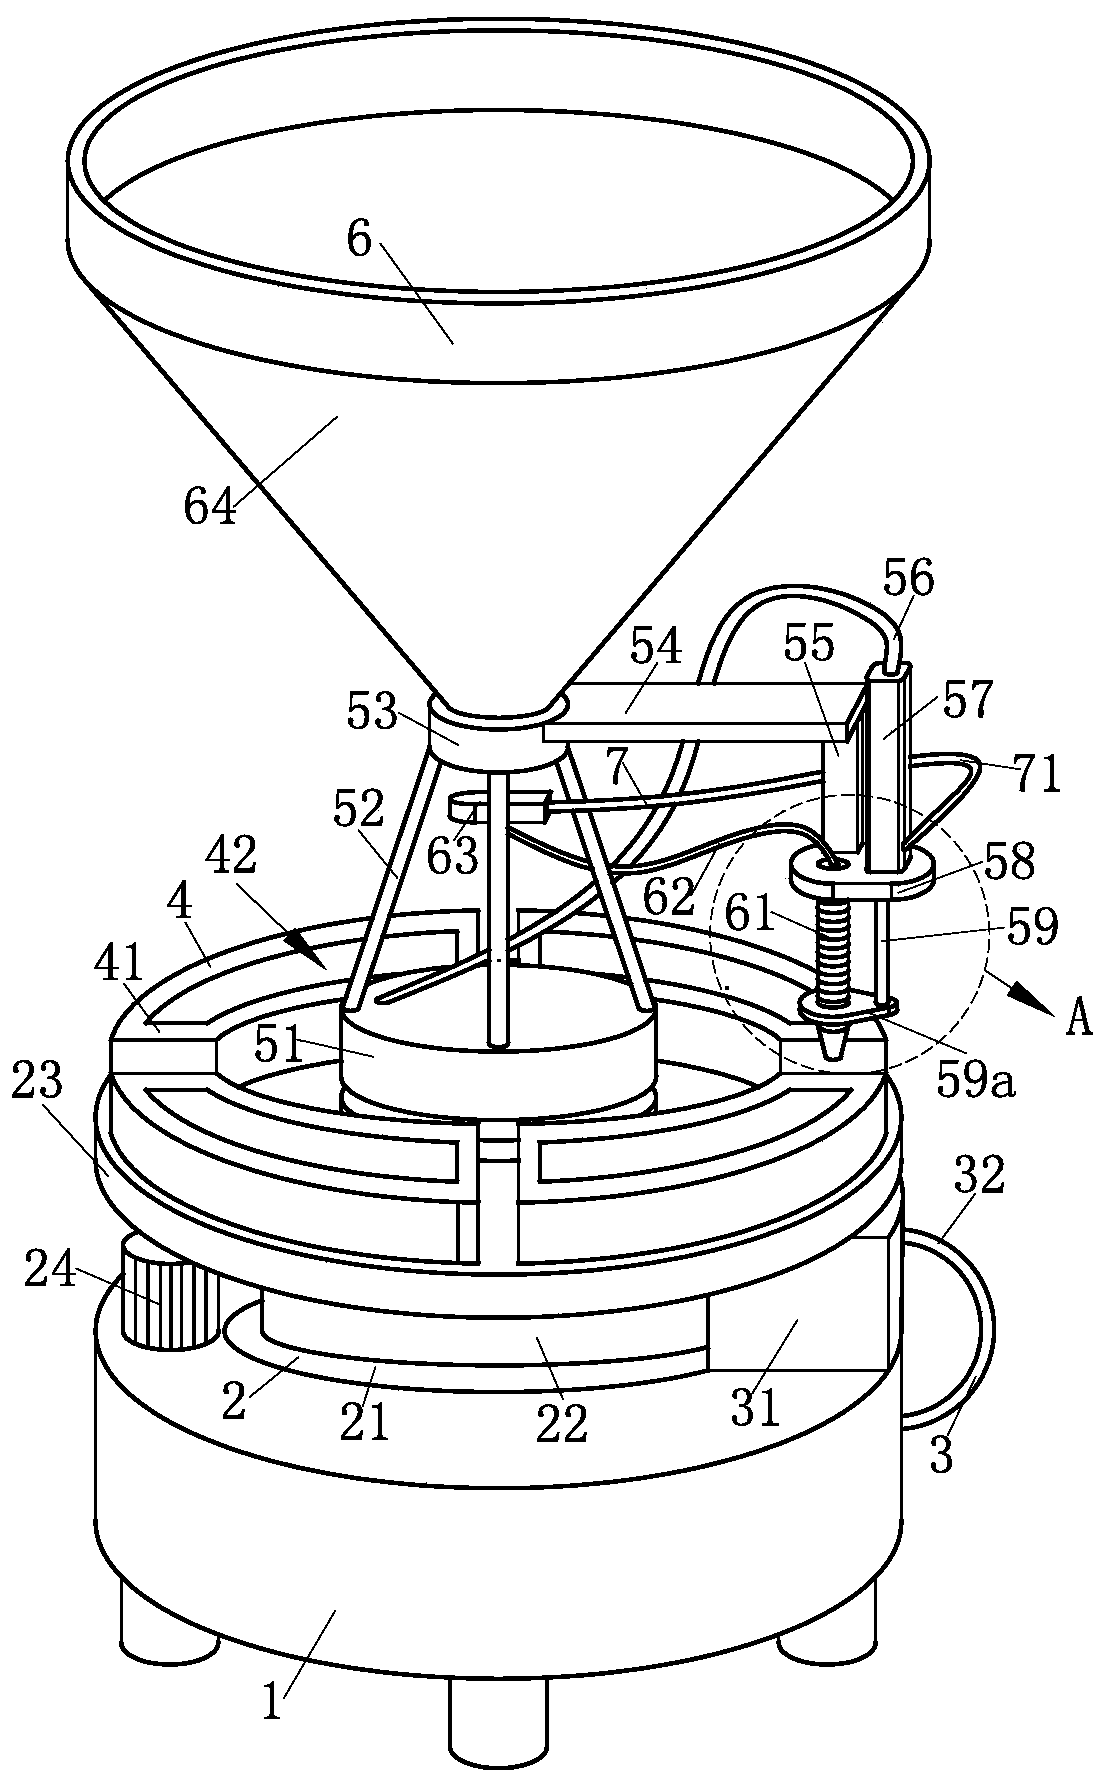 Anti-leakage device for batch filling of liquid skin care products